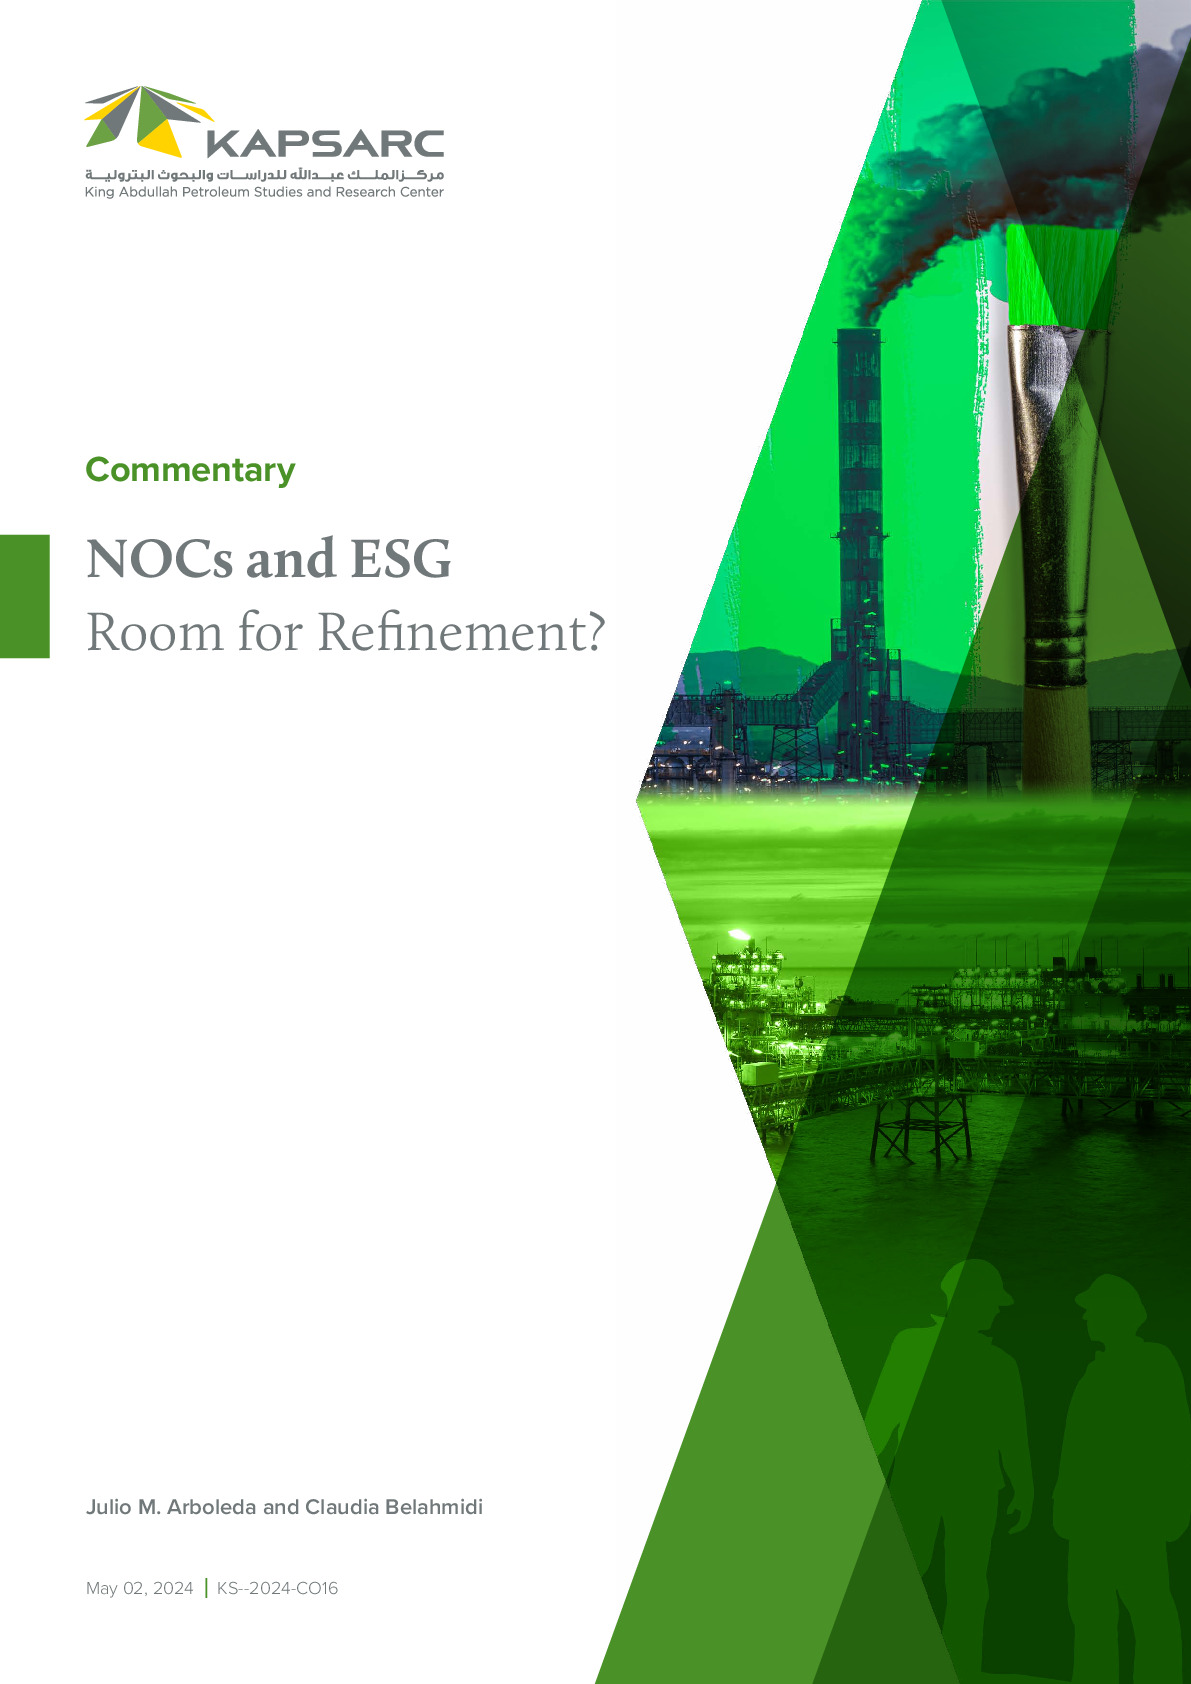 NOCs and ESG: Room for Refinement?